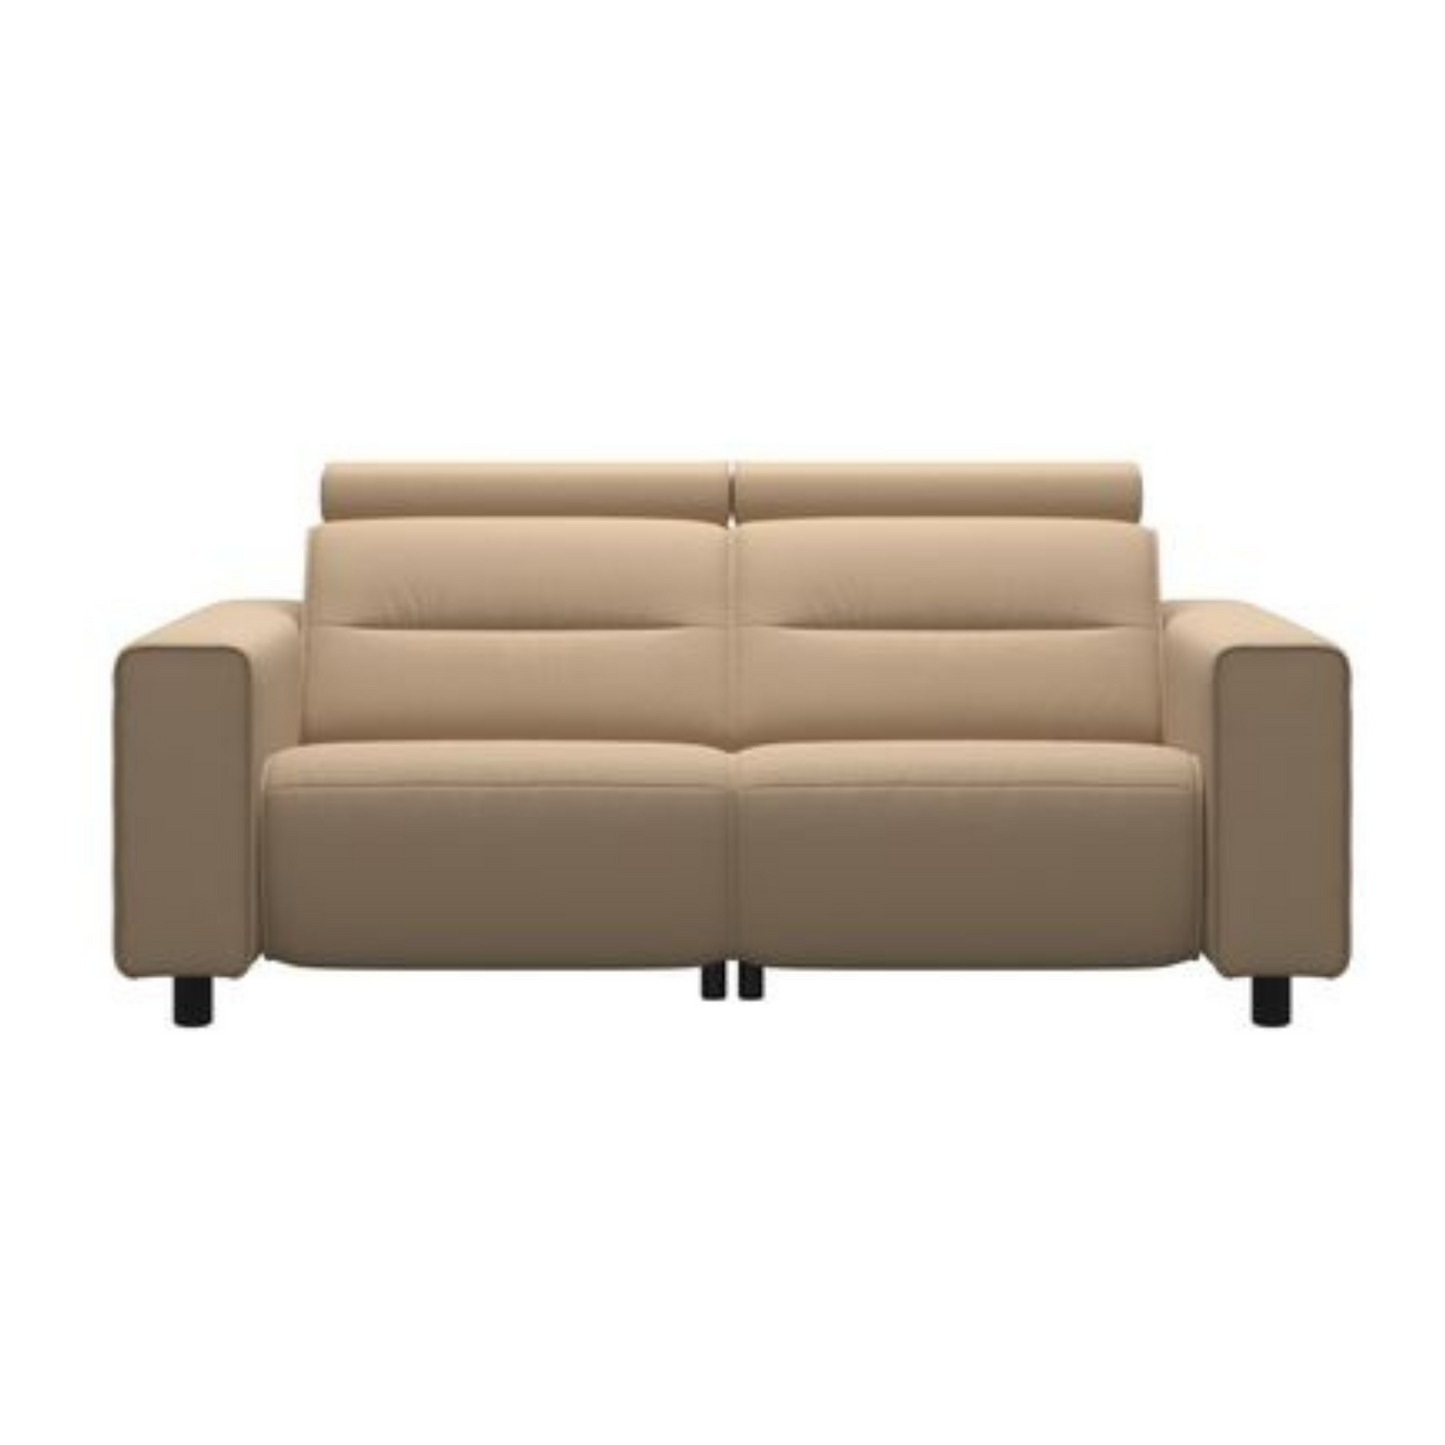 Emily Sofa with Wide Arm by Stressless